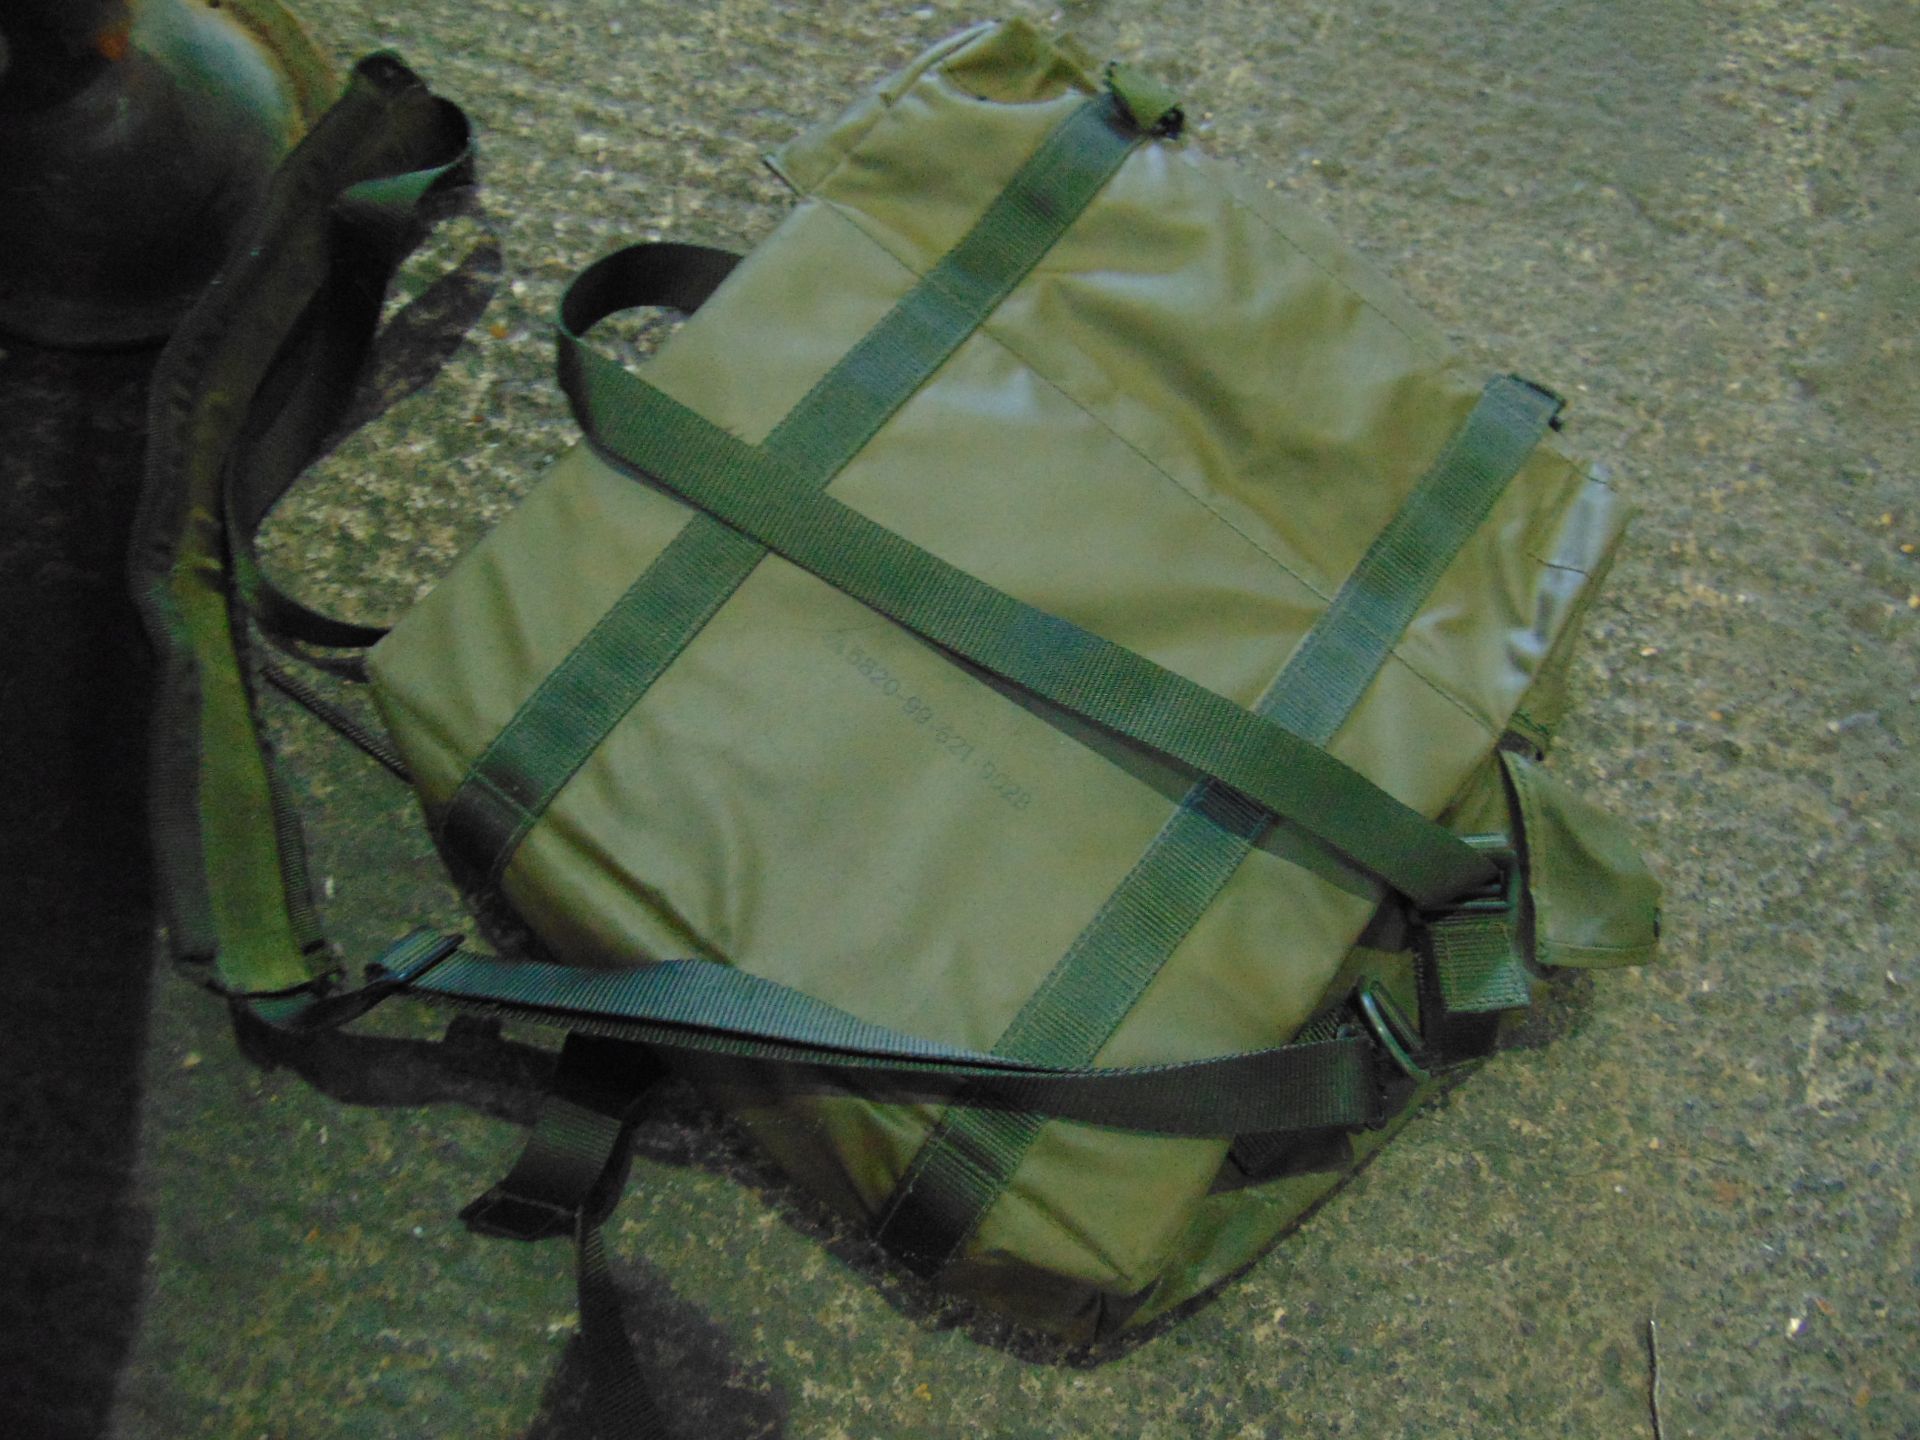 1X STILLAGE OF COMMS BAGS, ANTENA COVERS, ETC - Image 6 of 9